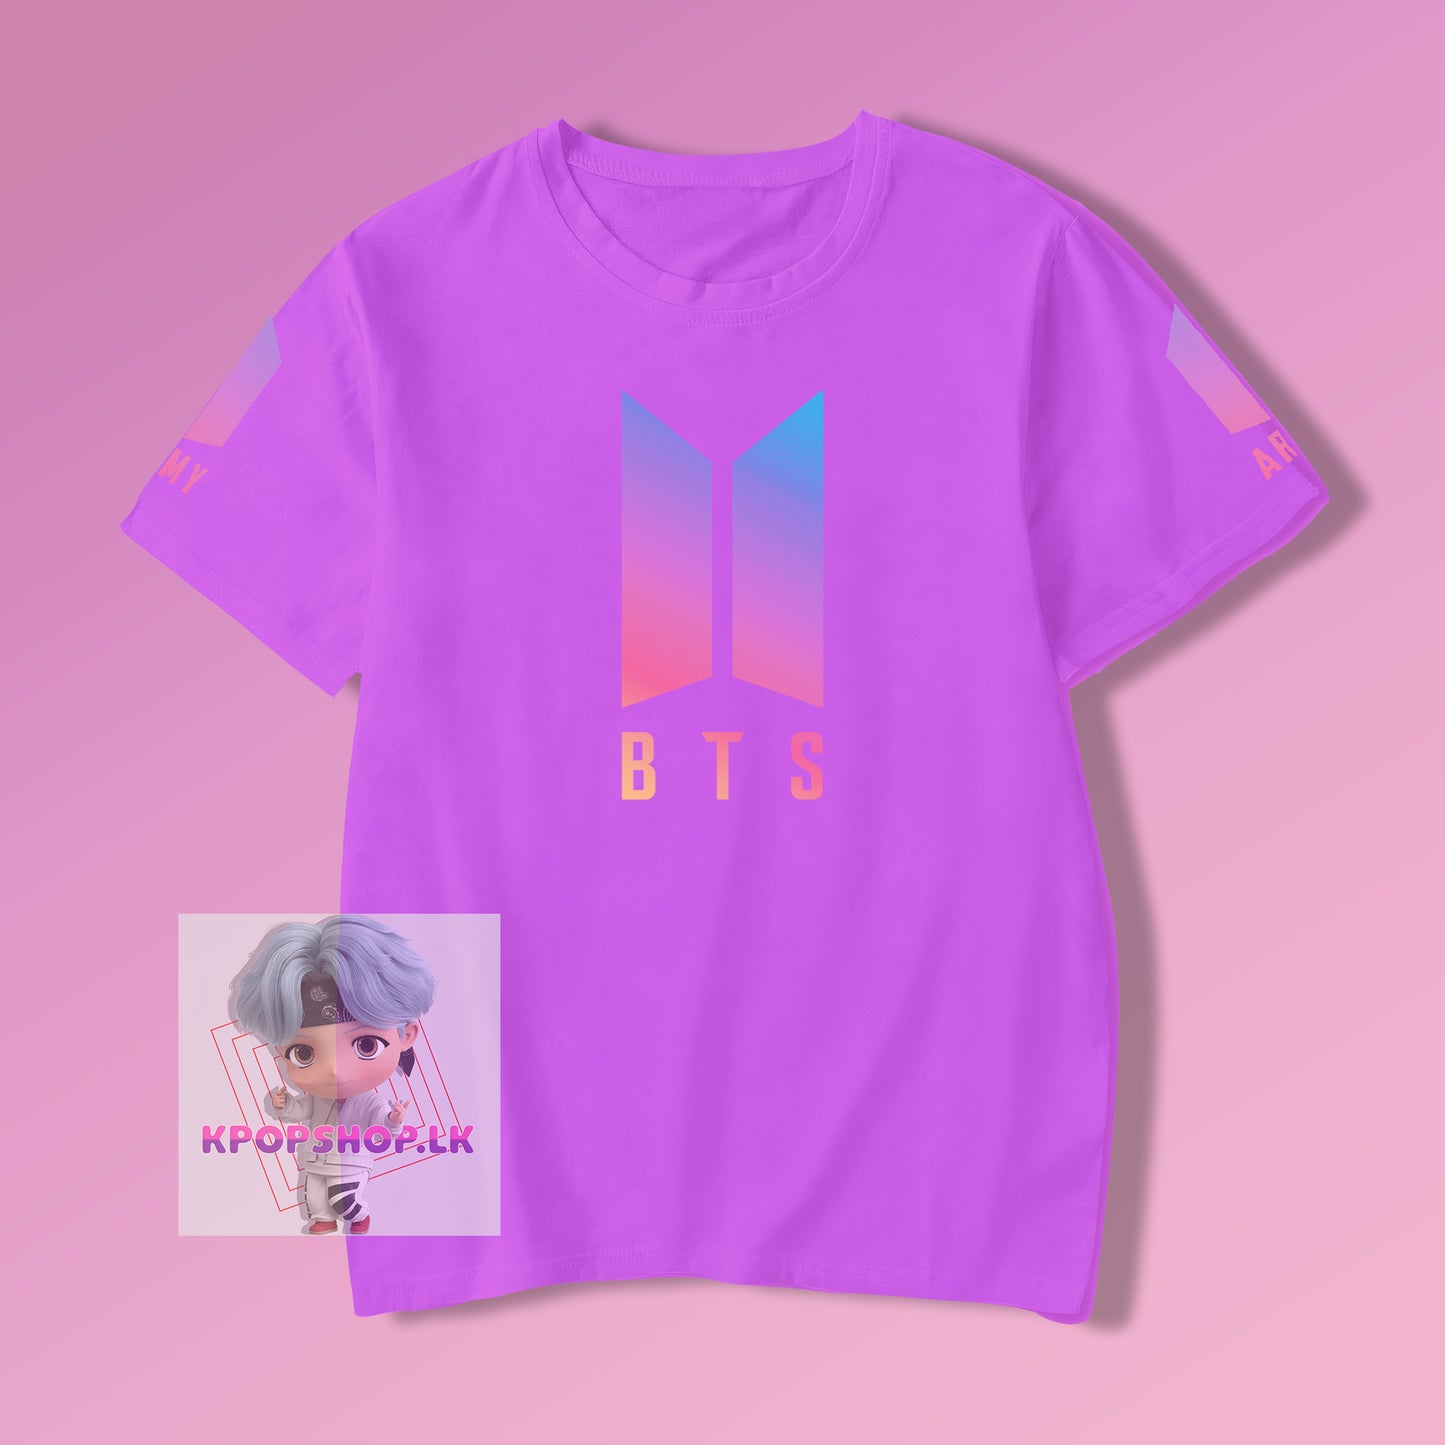 BTS And Army Logos KPOP T-shirt